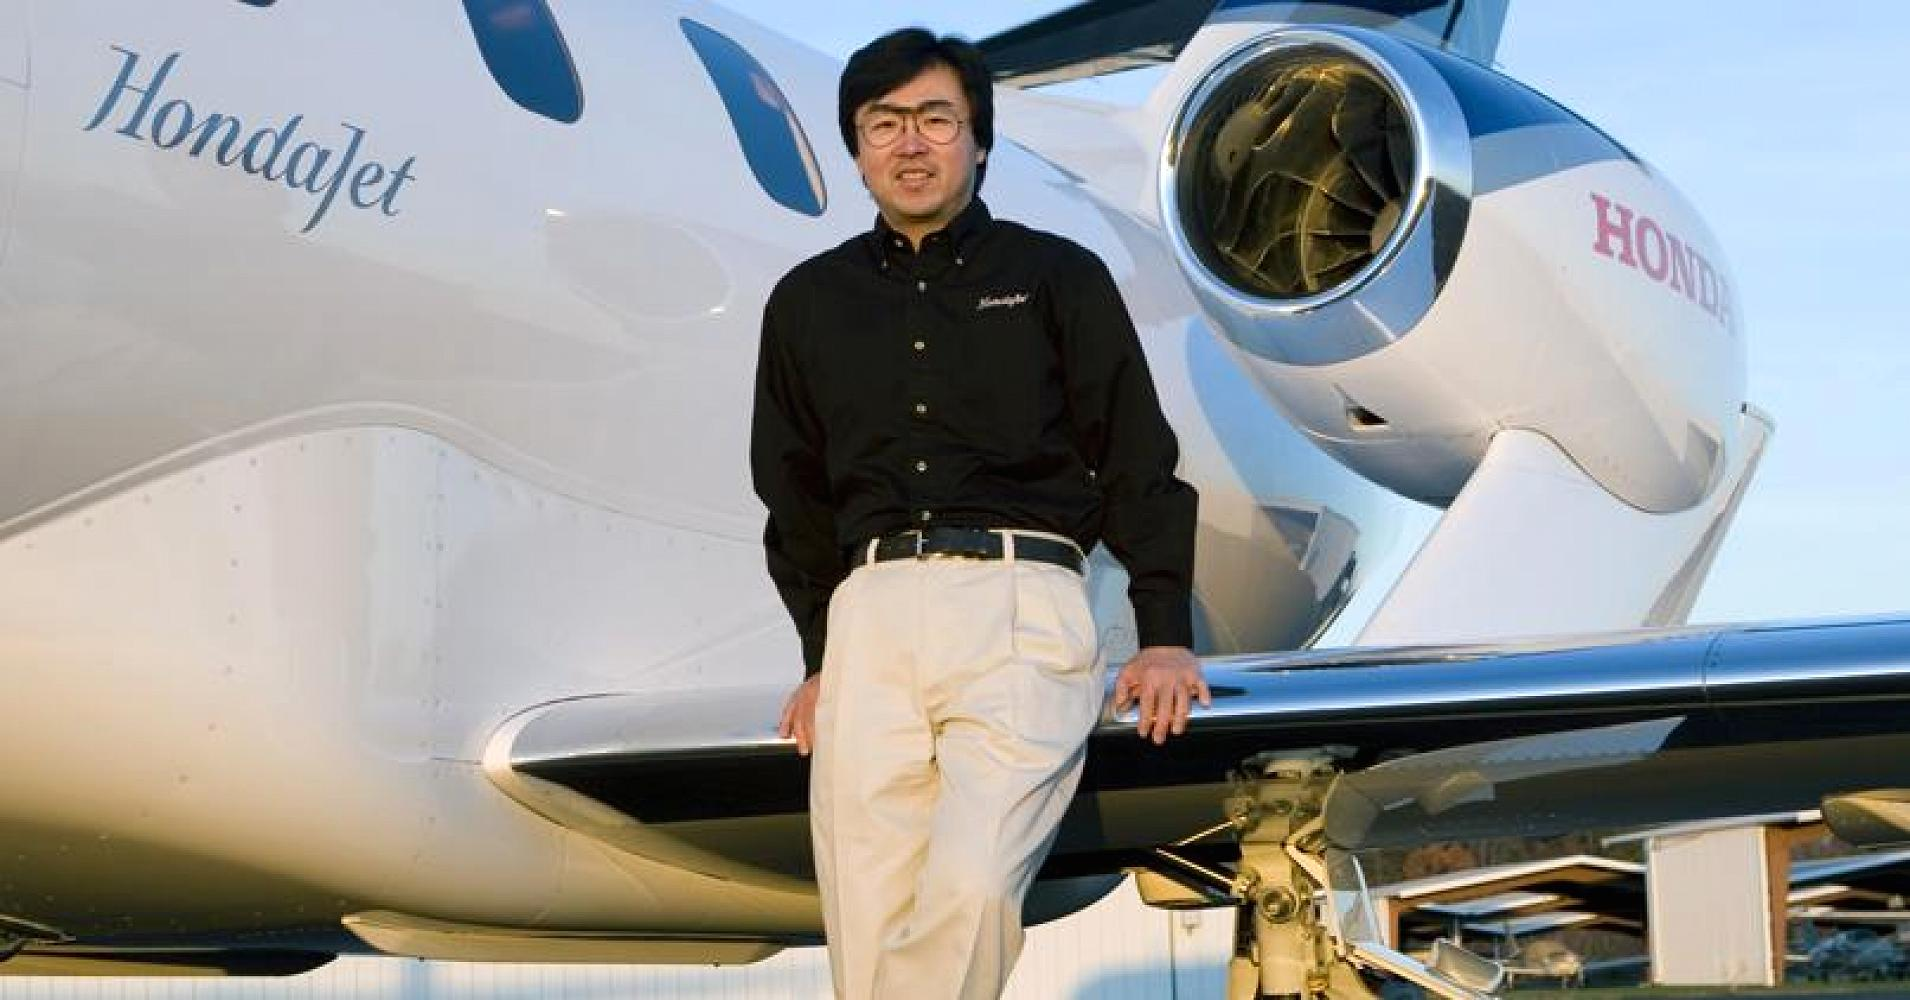 US$4.9 million HondaJet was introduced in 2005, but only received its certifications because of extensive testing, what kept Michimasa Fujino going?